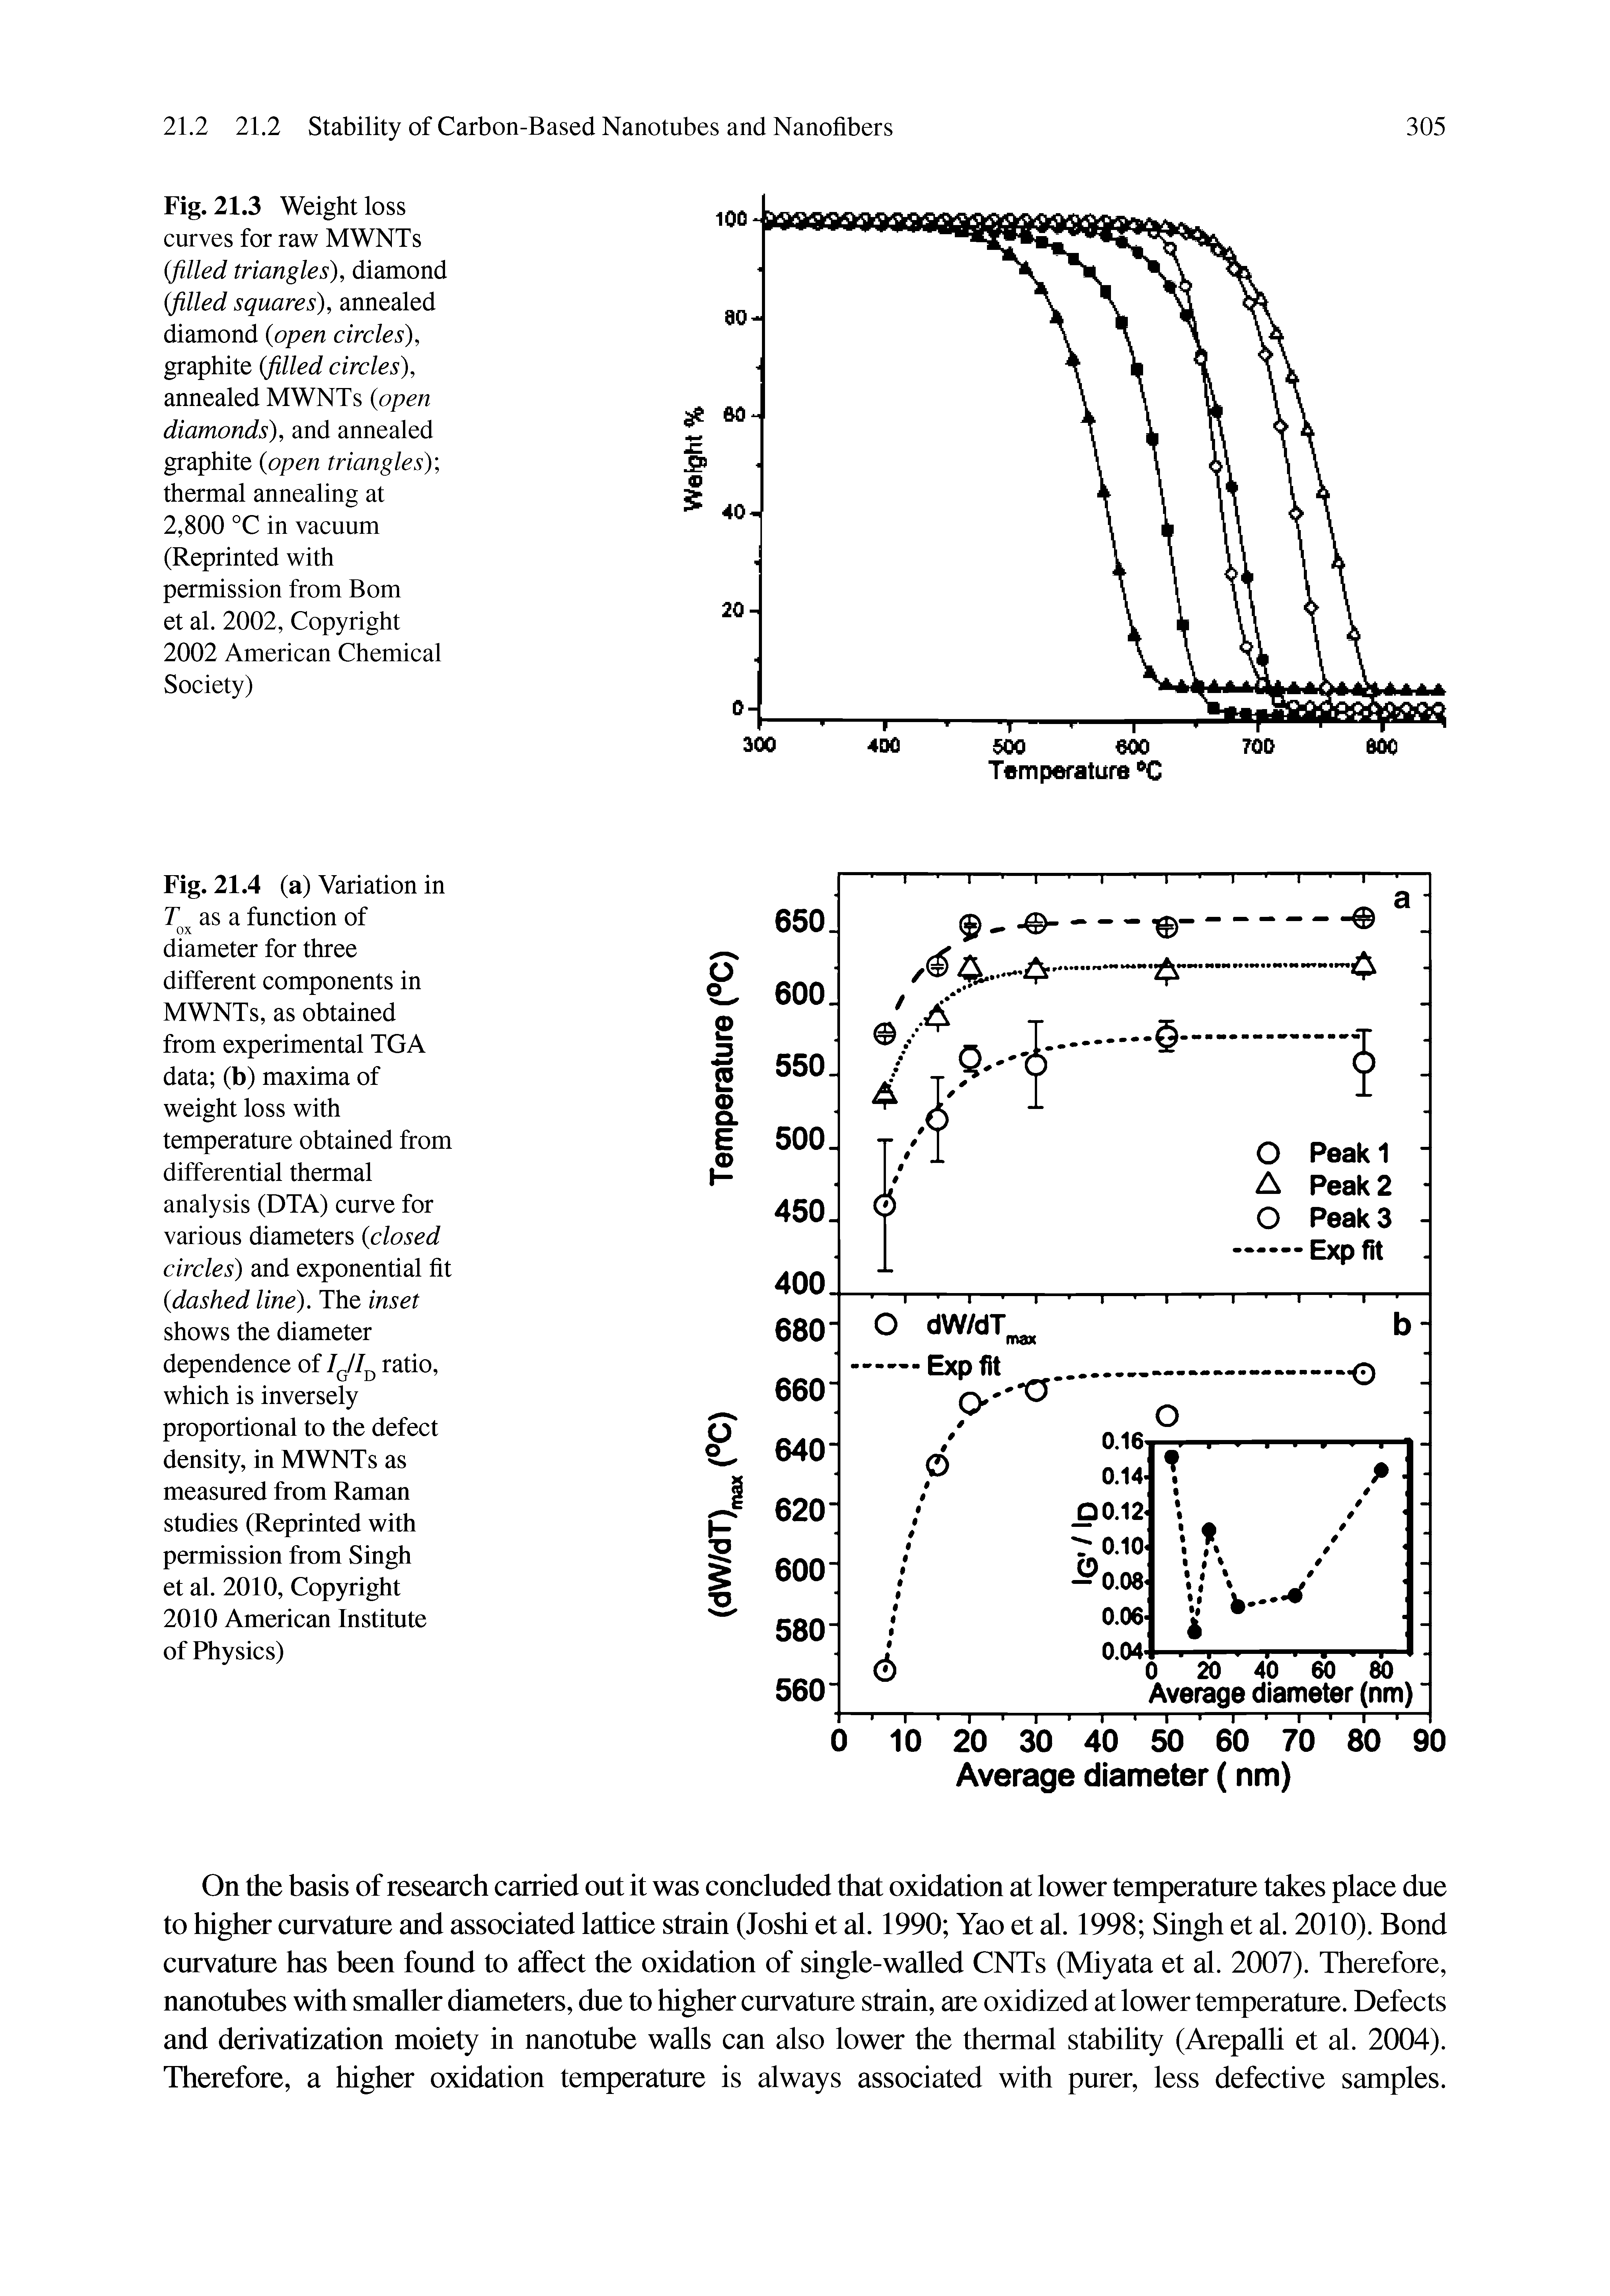 Fig. 21.3 Weight loss curves for raw MWNTs (filled triangles), diamond (filled squares), annealed diamond (open circles), graphite (filled circles), annealed MWNTs (open diamonds), and annealed graphite (open triangles) thermal annealing at 2,800 °C in vacuum (Reprinted with permission from Bom et al. 2002, Copyright 2002 American Chemical Society)...